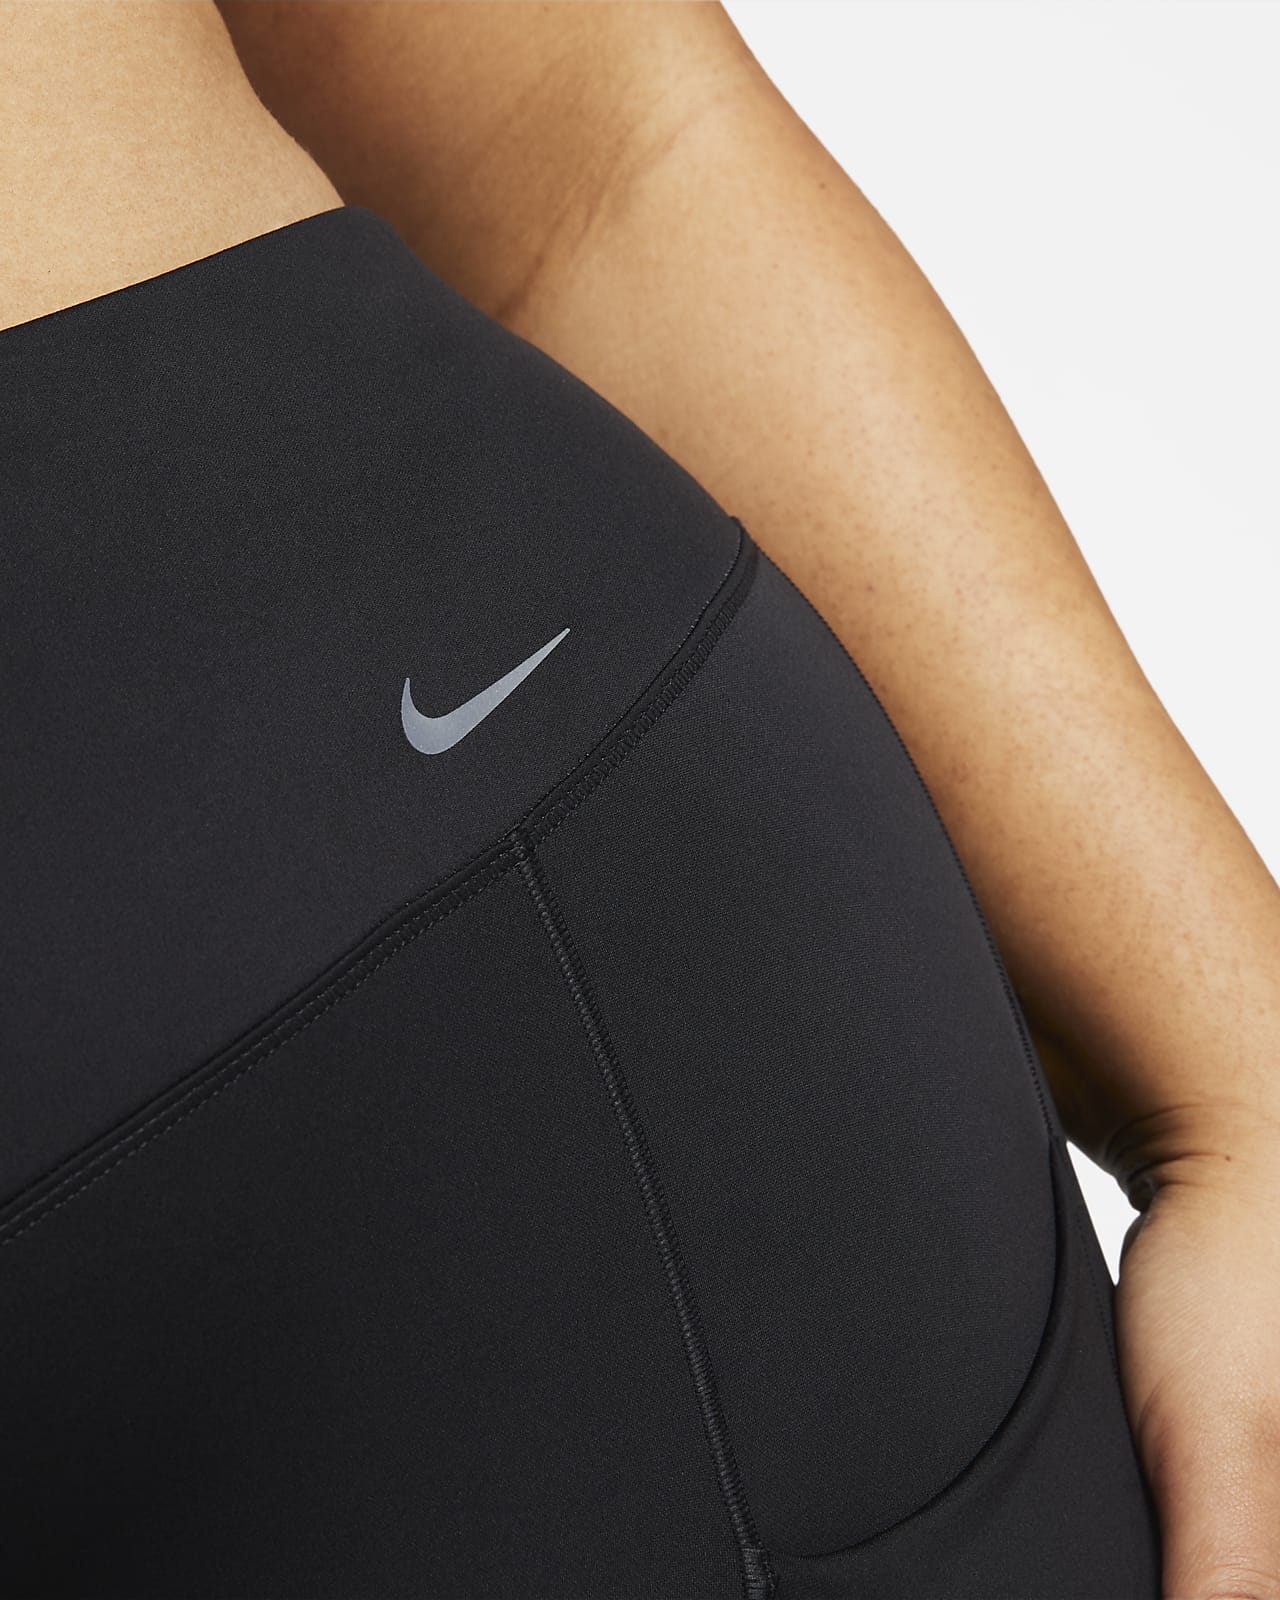 NEW Small Nike Go Firm-Support High Rise 7/8 Leggings w/ Pockets